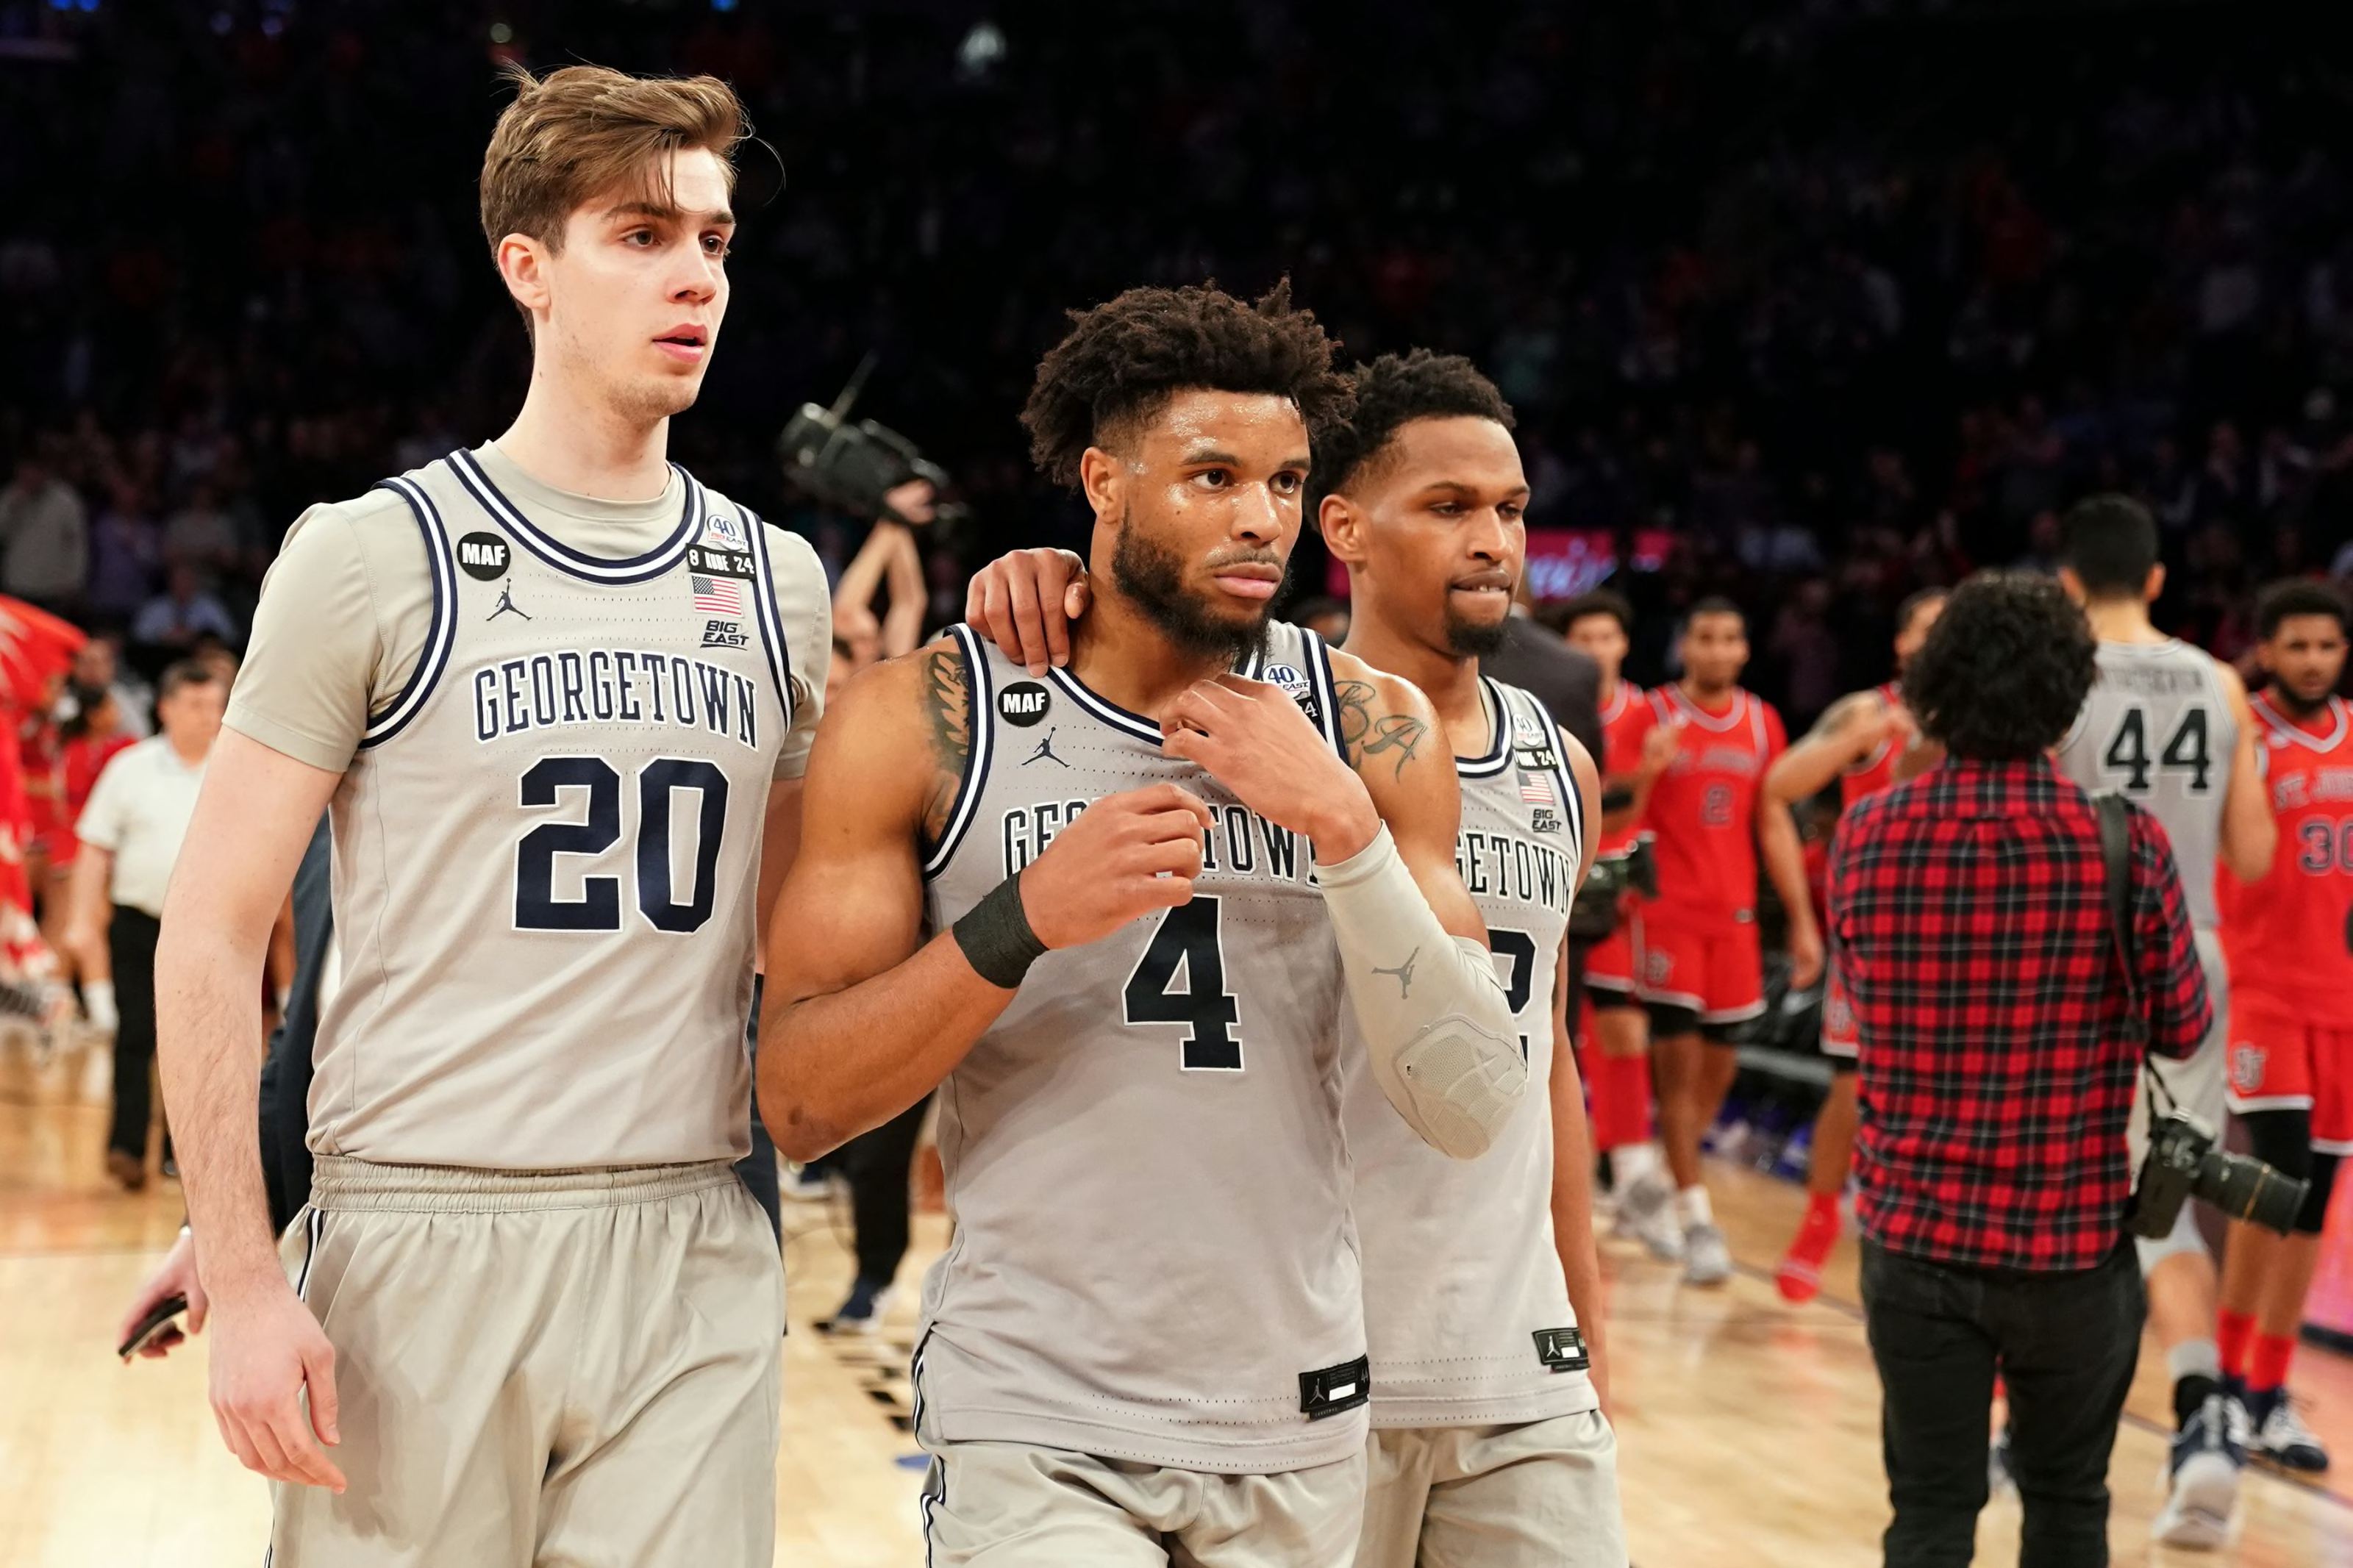 Georgetown Basketball: 2020-21 season preview for the Hoyas - Page 4